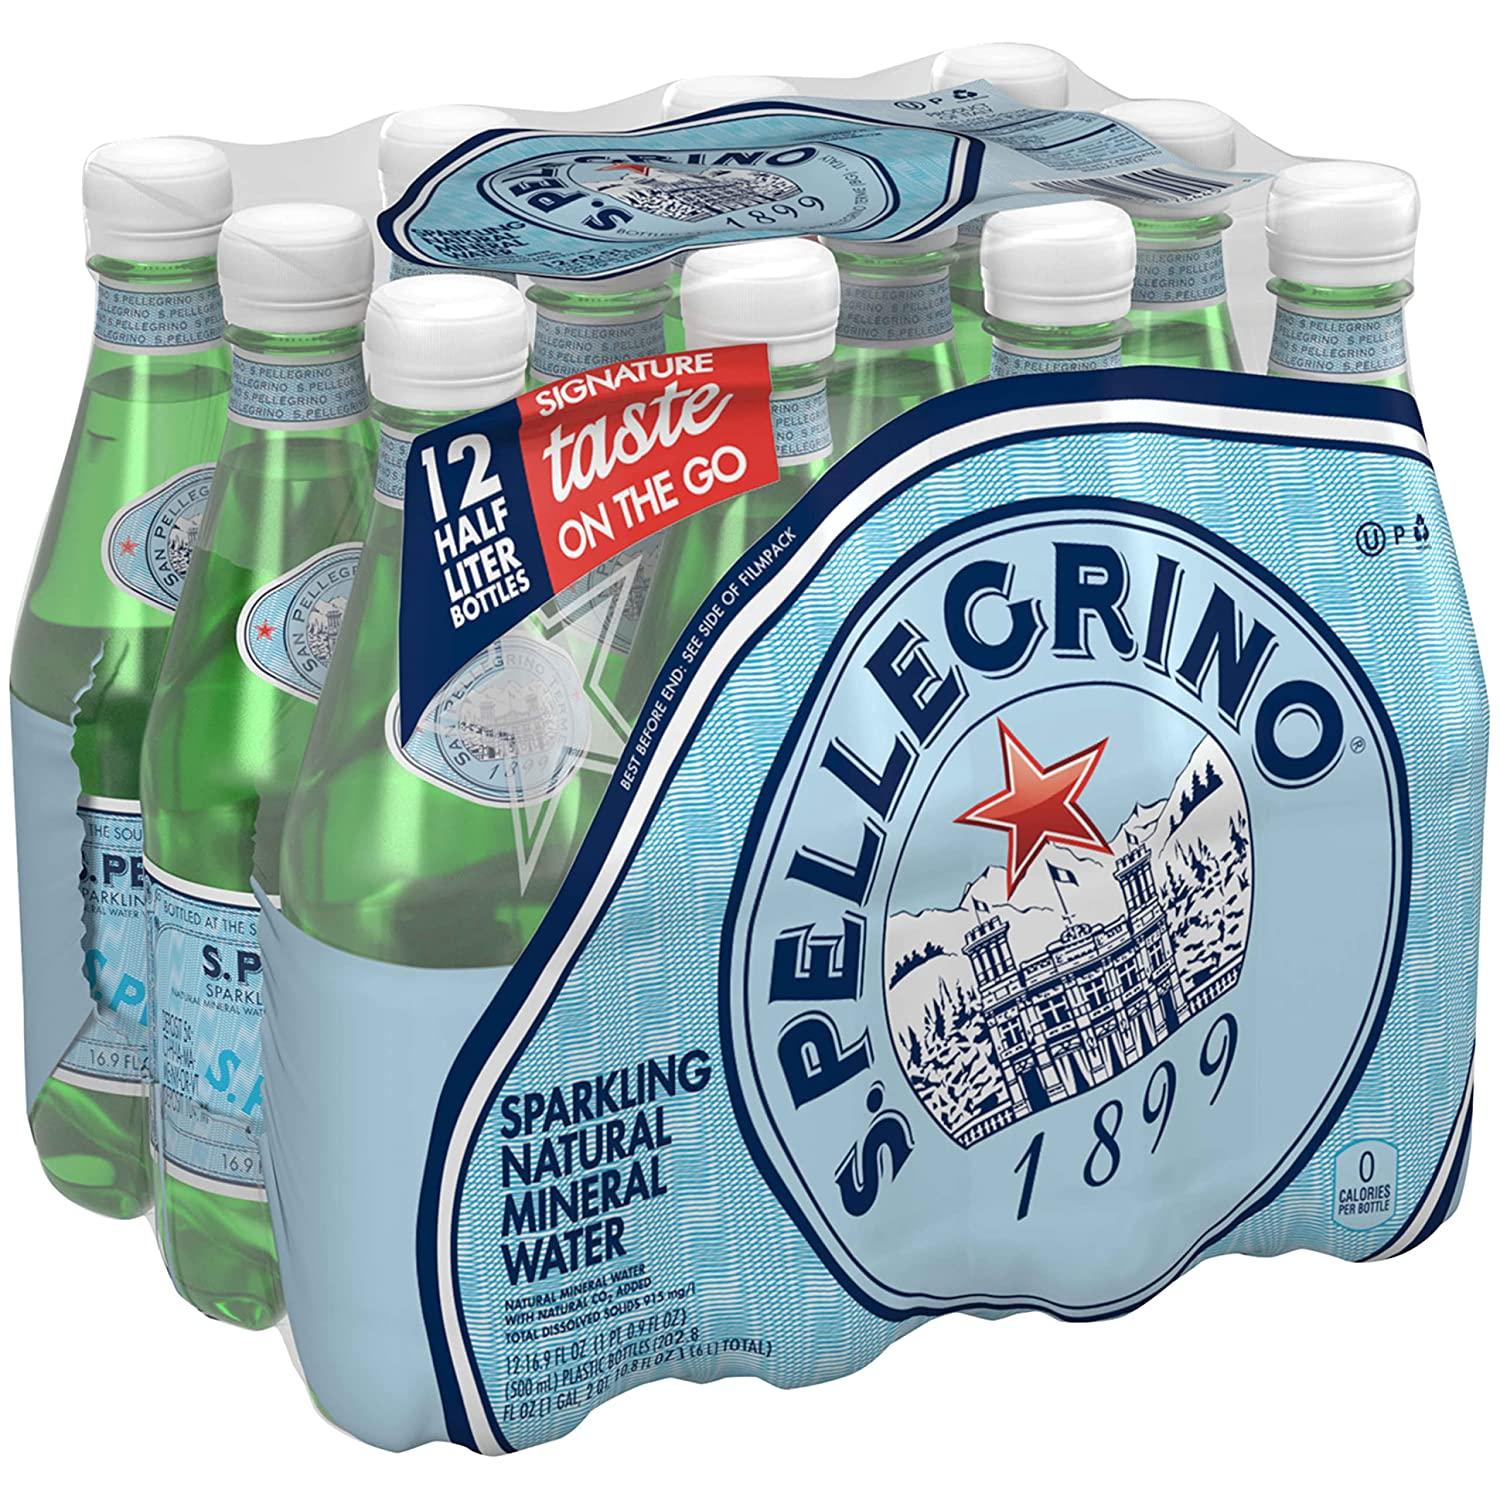 12 S.Pellegrino Sparkling Natural Mineral Water for $8.21 Shipped